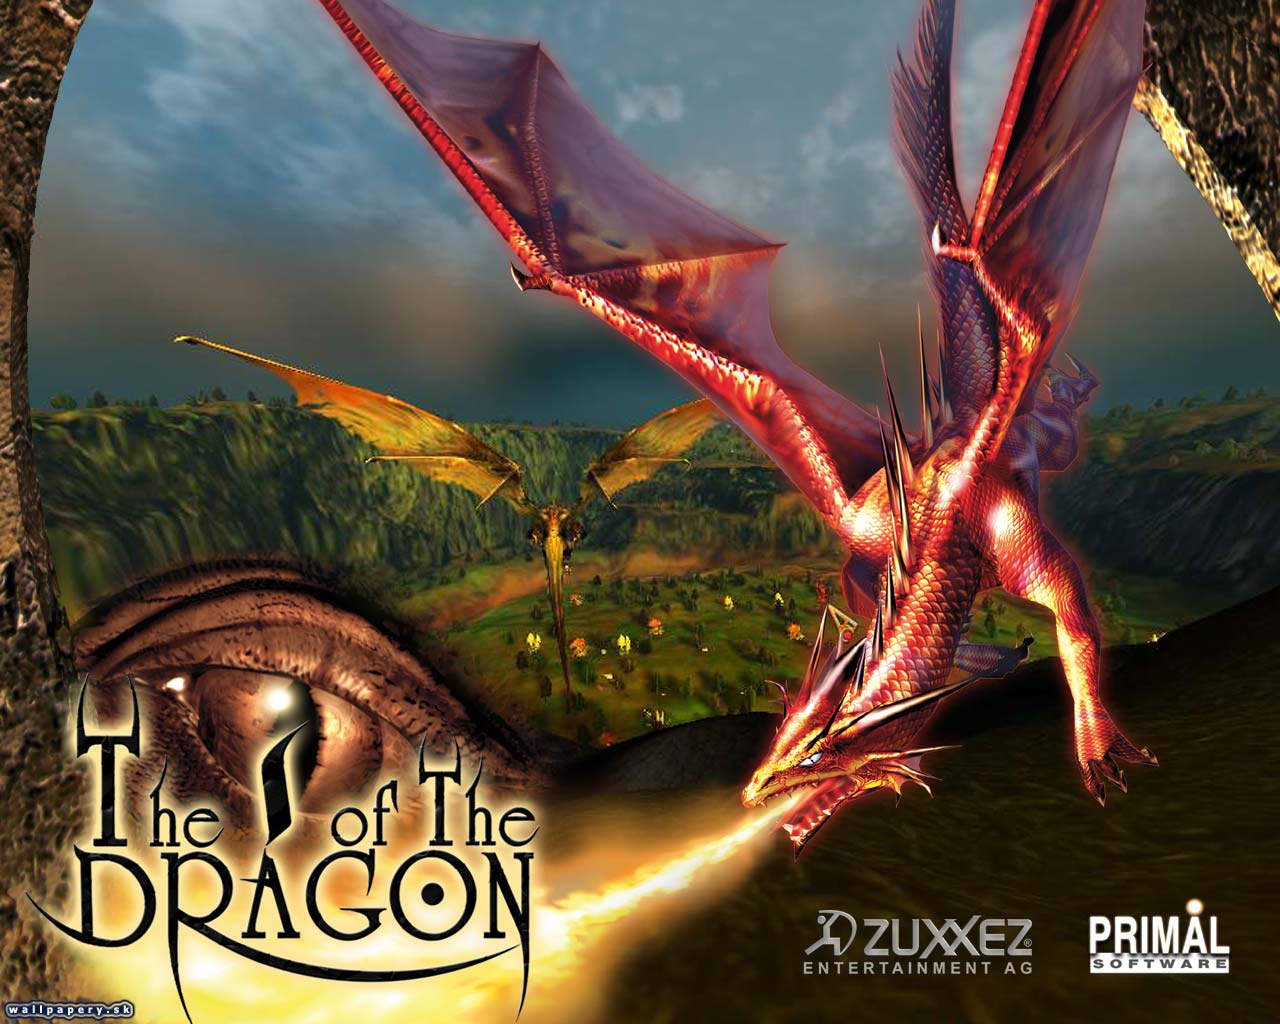 The I of the Dragon - wallpaper 5